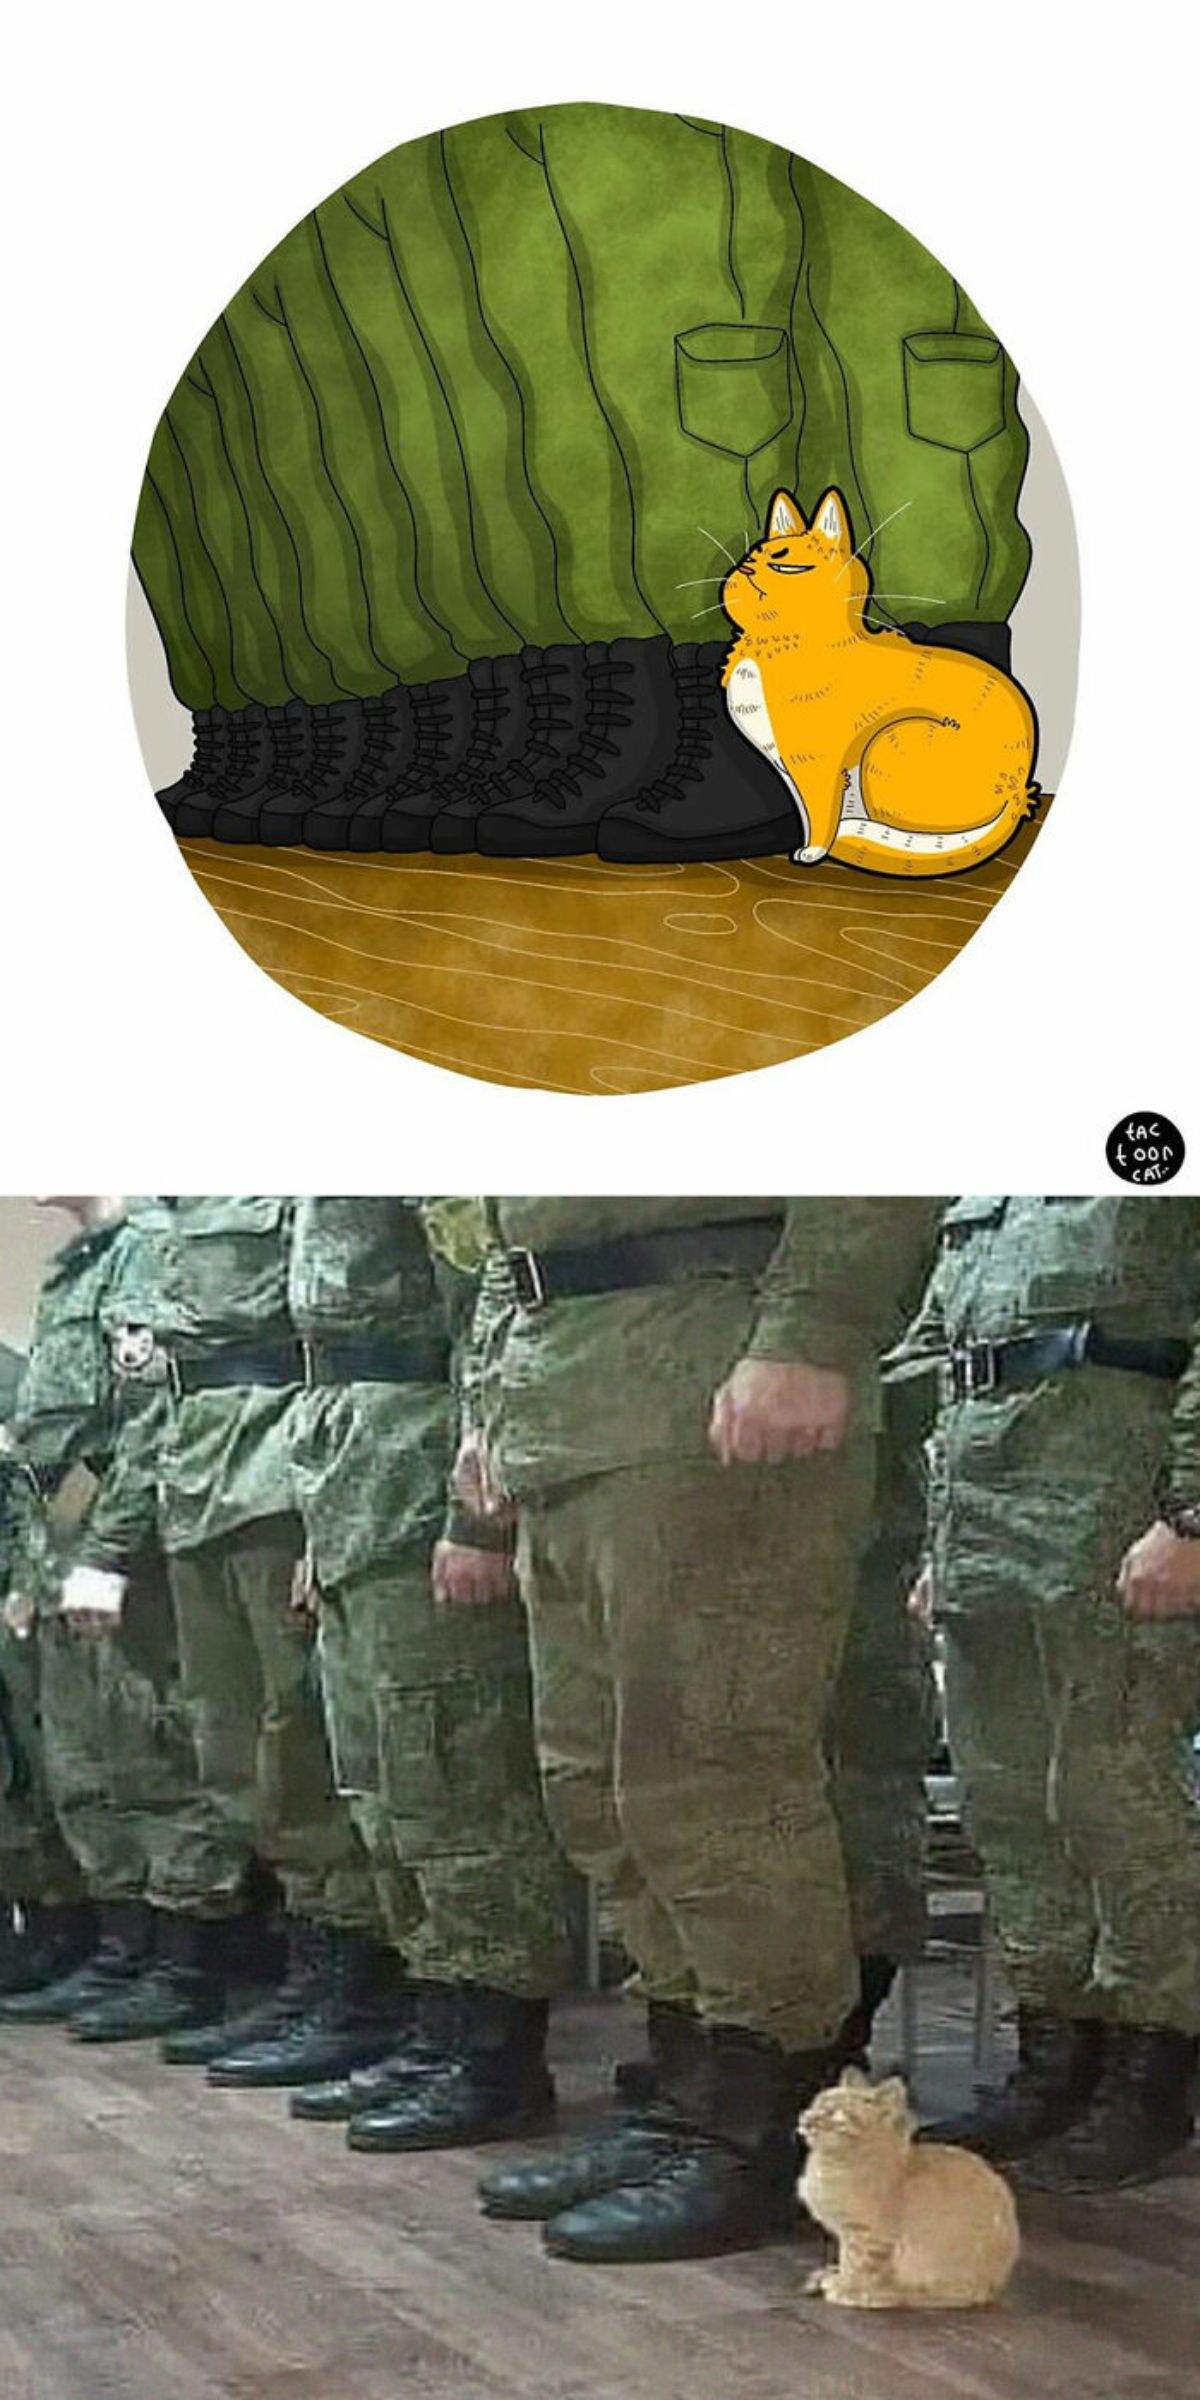 cartoon photo and real photo of an orange cat sitting next to a row of people in military uniform with another row behind them